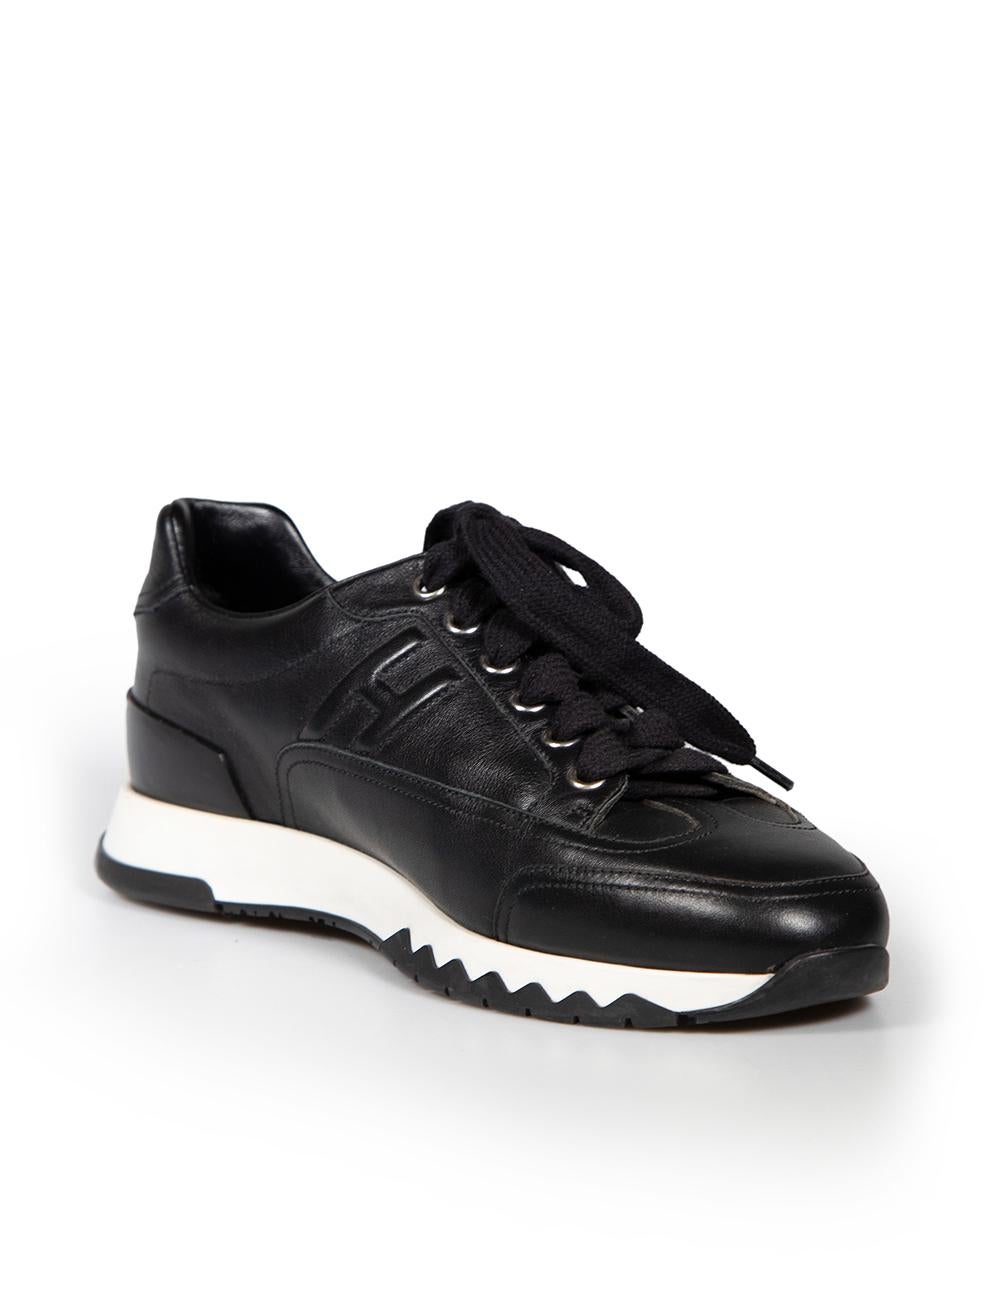 CONDITION is Very good. Minimal wear to trainers is evident. Minimal wear to outsole with some light marks to the rubber on this used Hermès designer resale item.
 
 
 
 Details
 
 
 Model: Trail
 
 Black
 
 Leather
 
 Trainers
 
 Round toe
 
 Lace